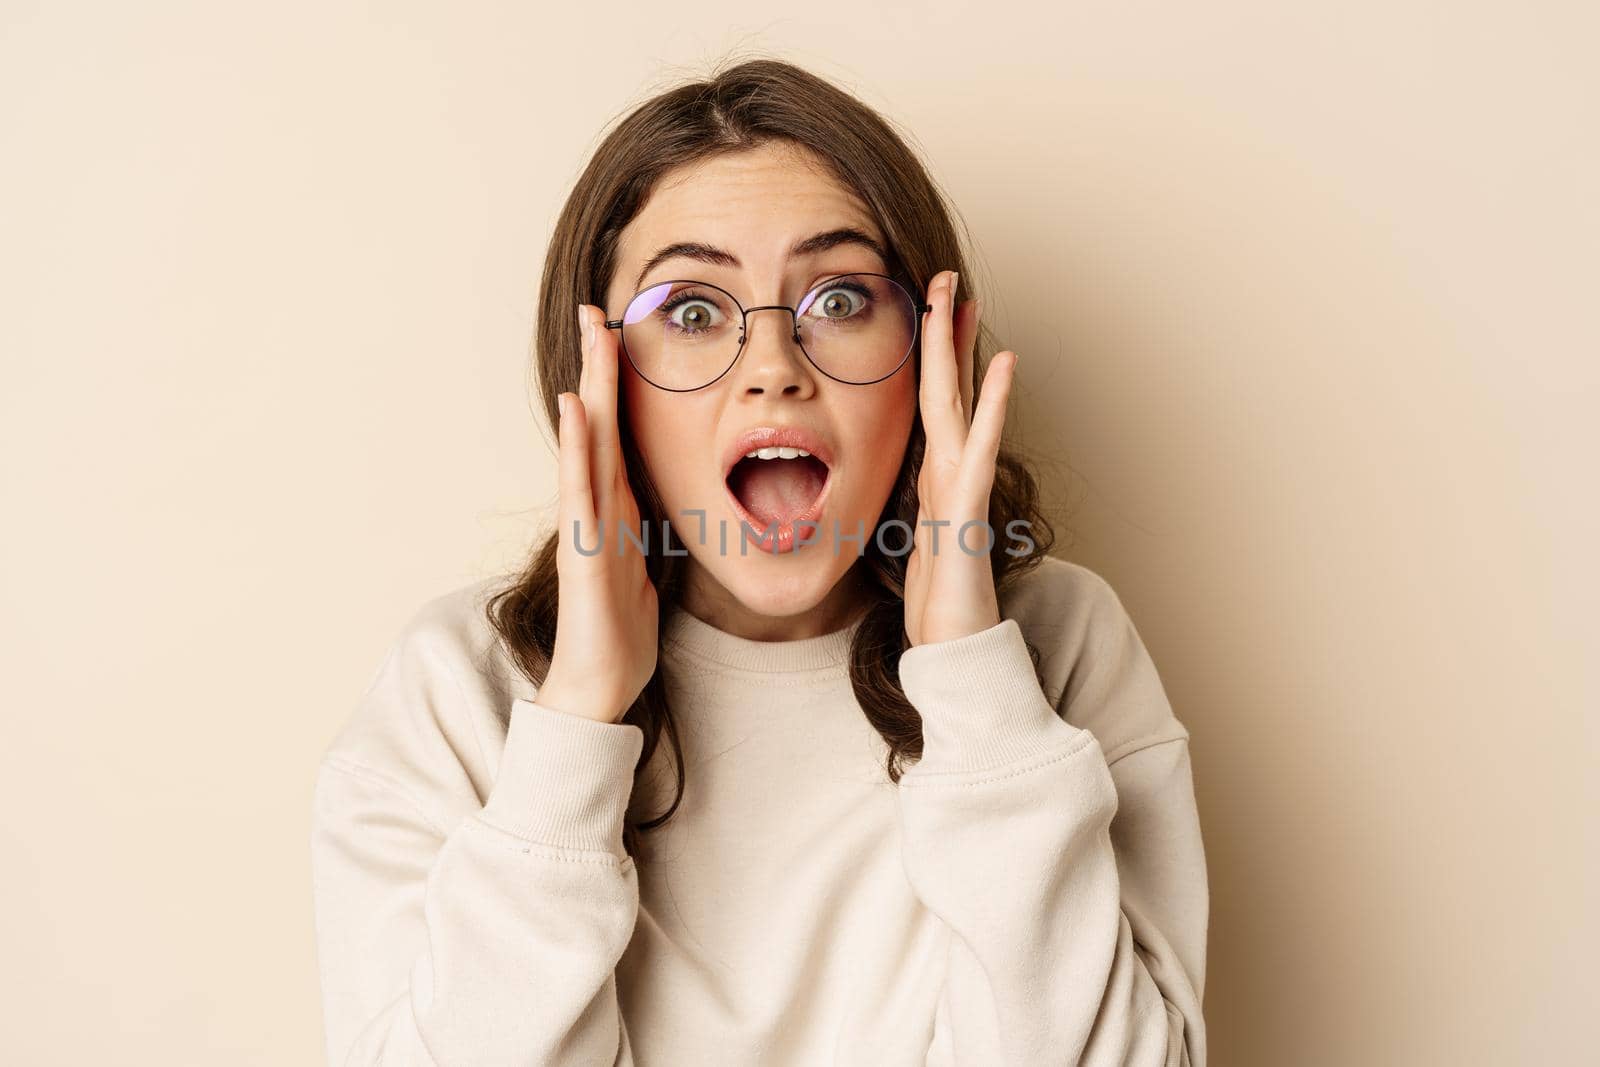 Close up portrait of cute woman in glasses looking impressed, reacting amazed at smth she sees, standing over beige background.